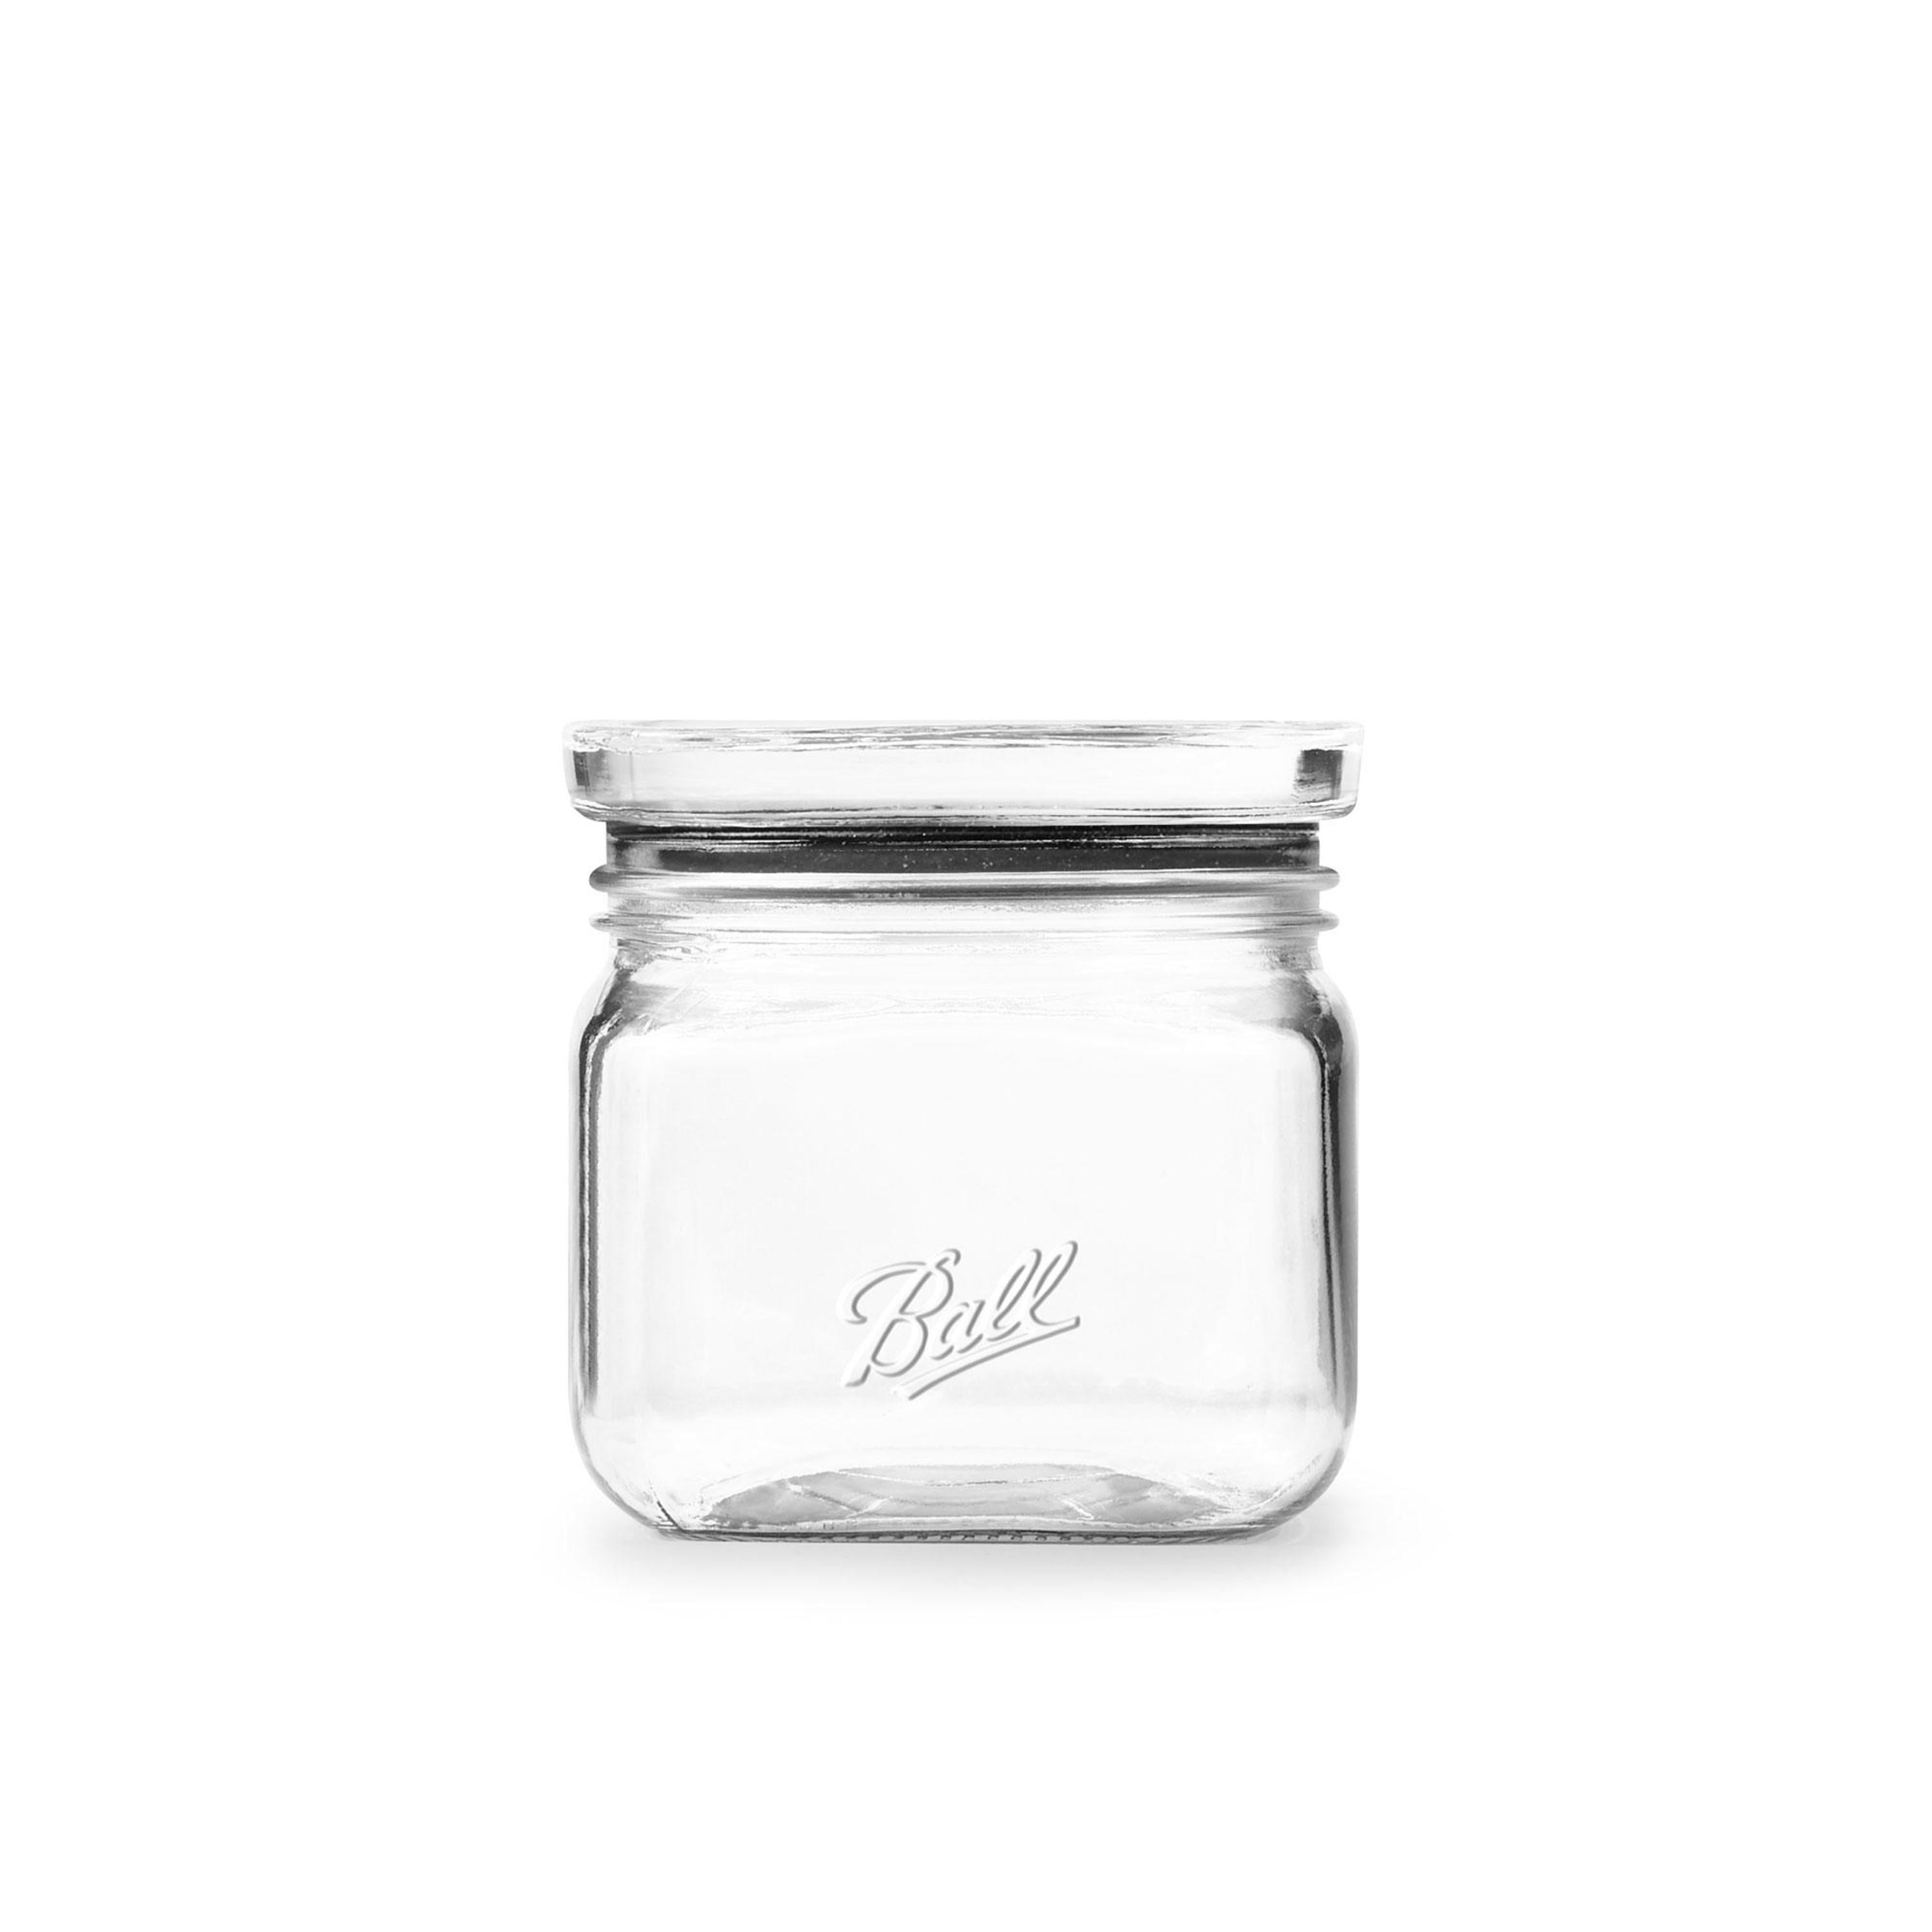 Jucoan 12 Pack 24 oz Glass Mason Jar Canning Jar with Silver Airtight Metal  Lids, Regular Mouth Glass Jars for Preserving Fruits, Vegetables, Pickles